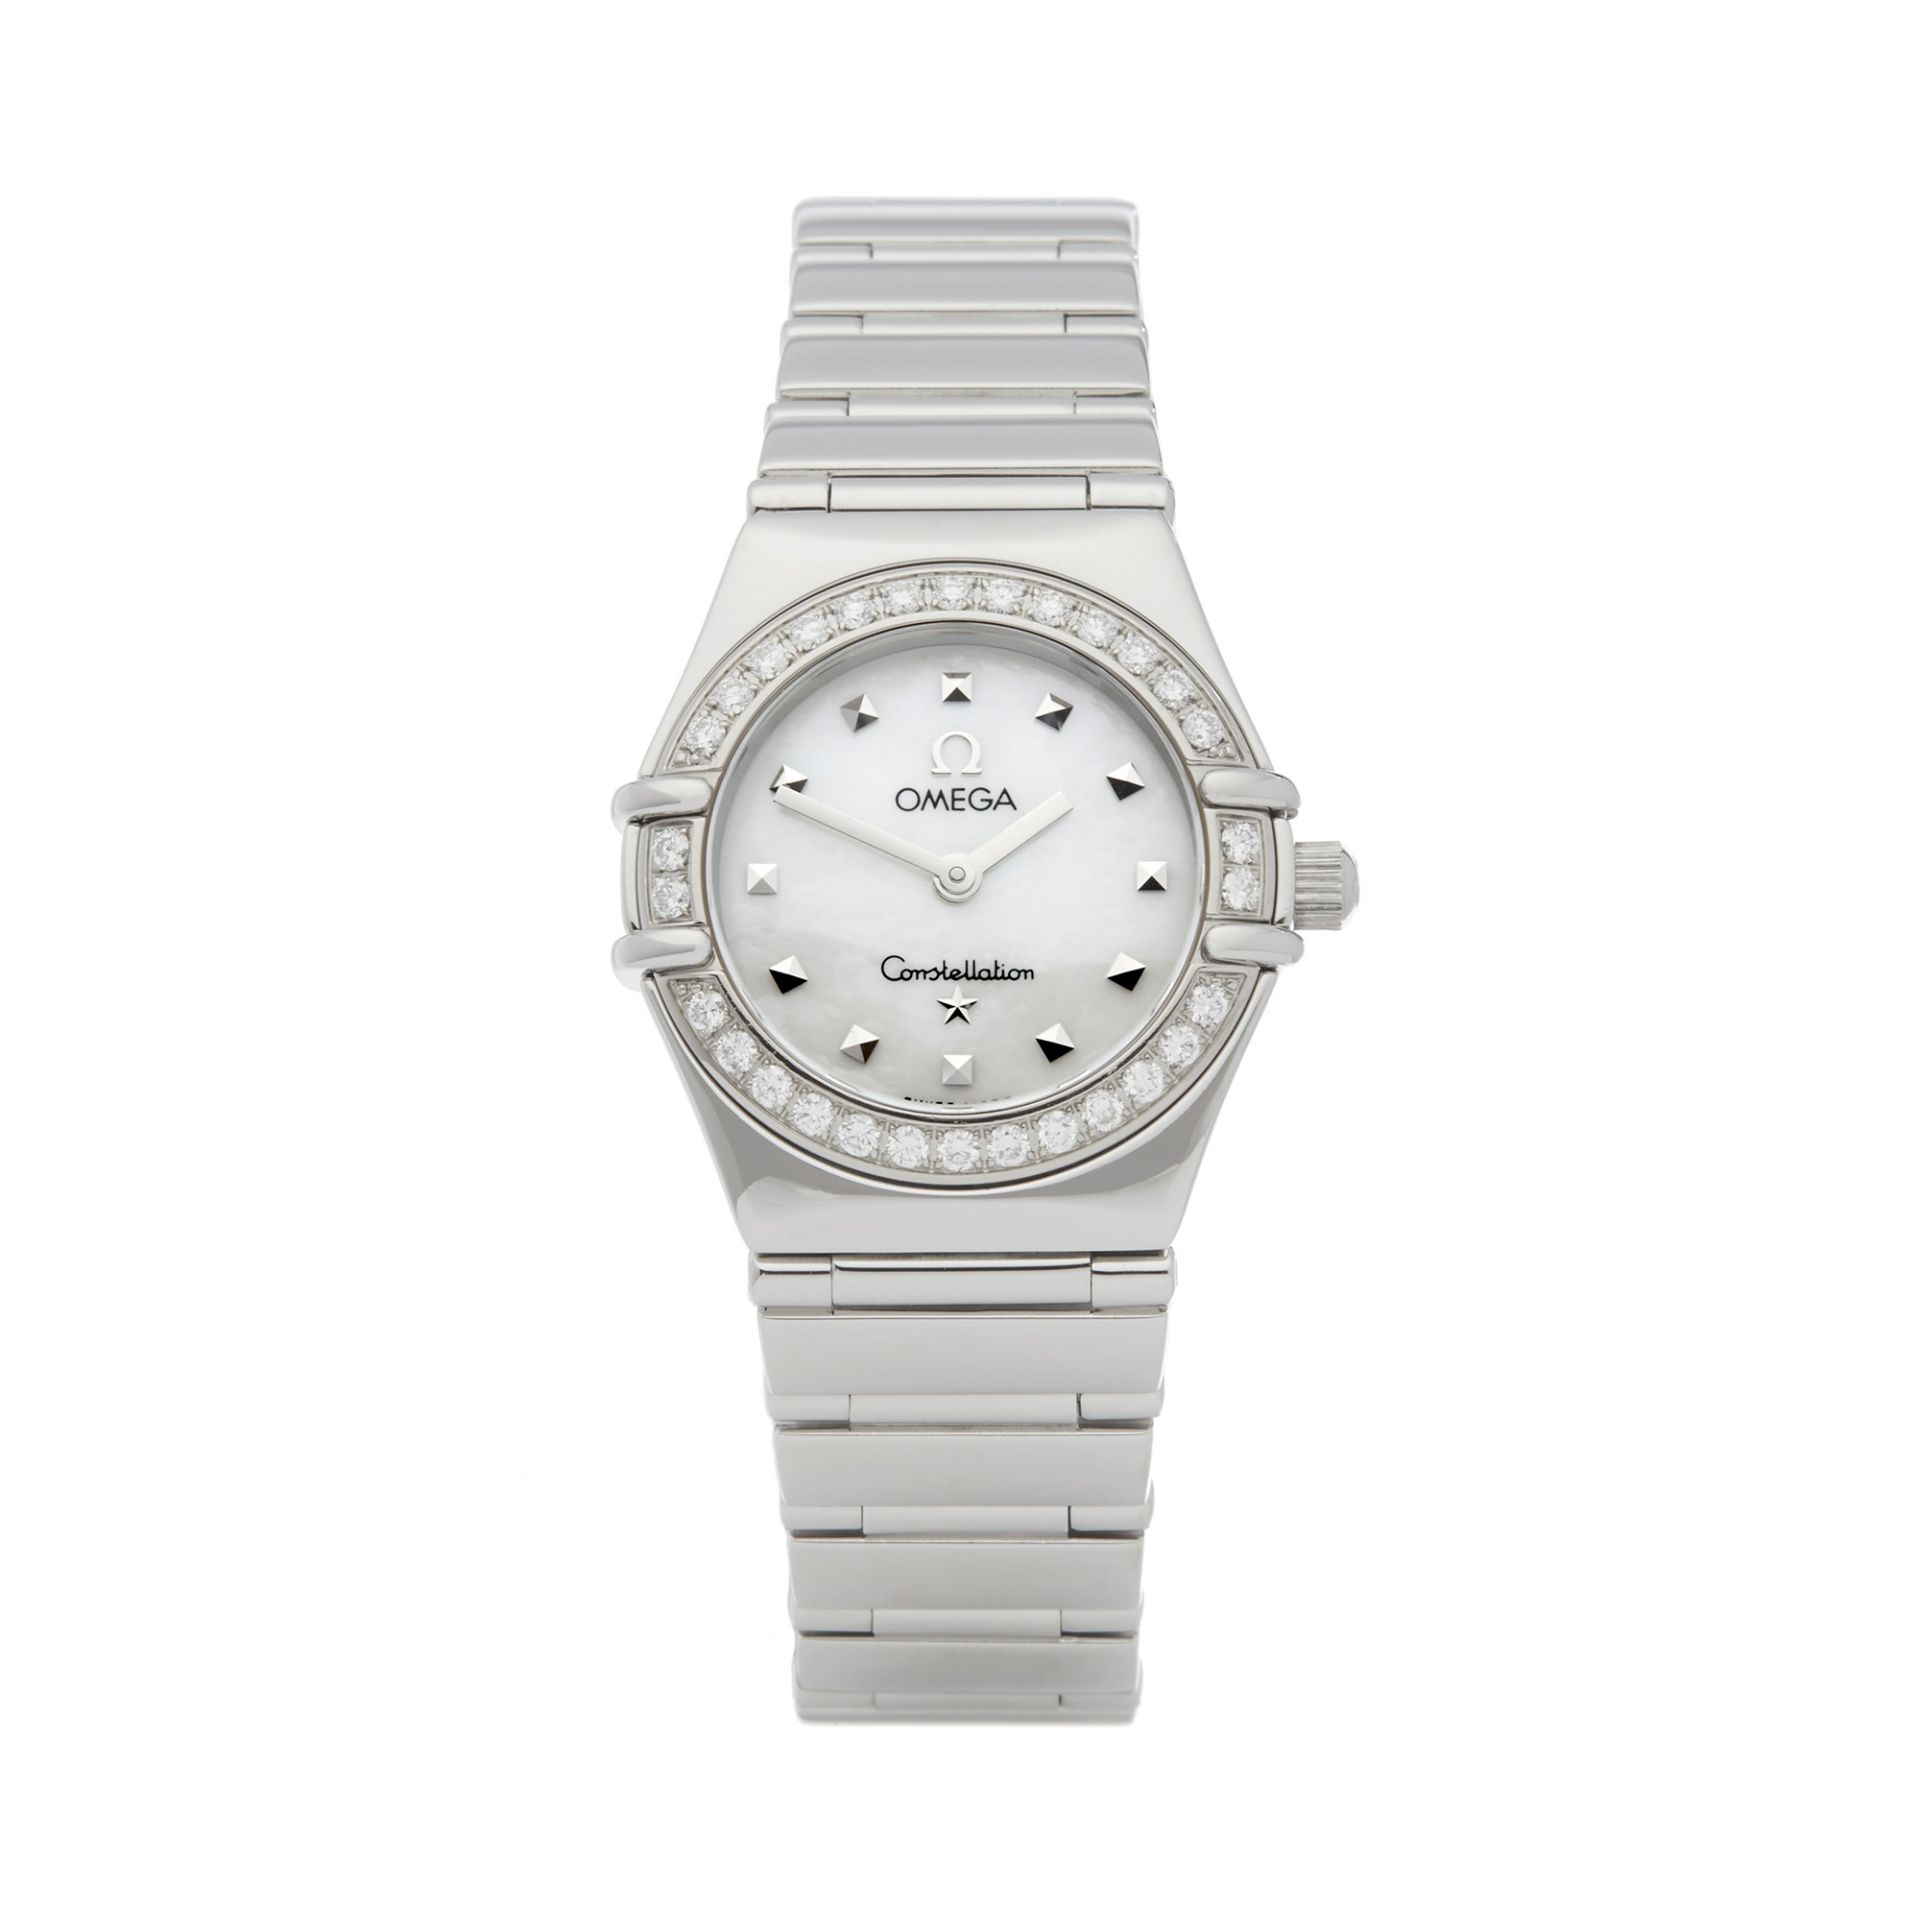 Omega Constellation 1465.71.00 Ladies Stainless Steel Diamond Mother Of Pearl Watch - Image 8 of 8